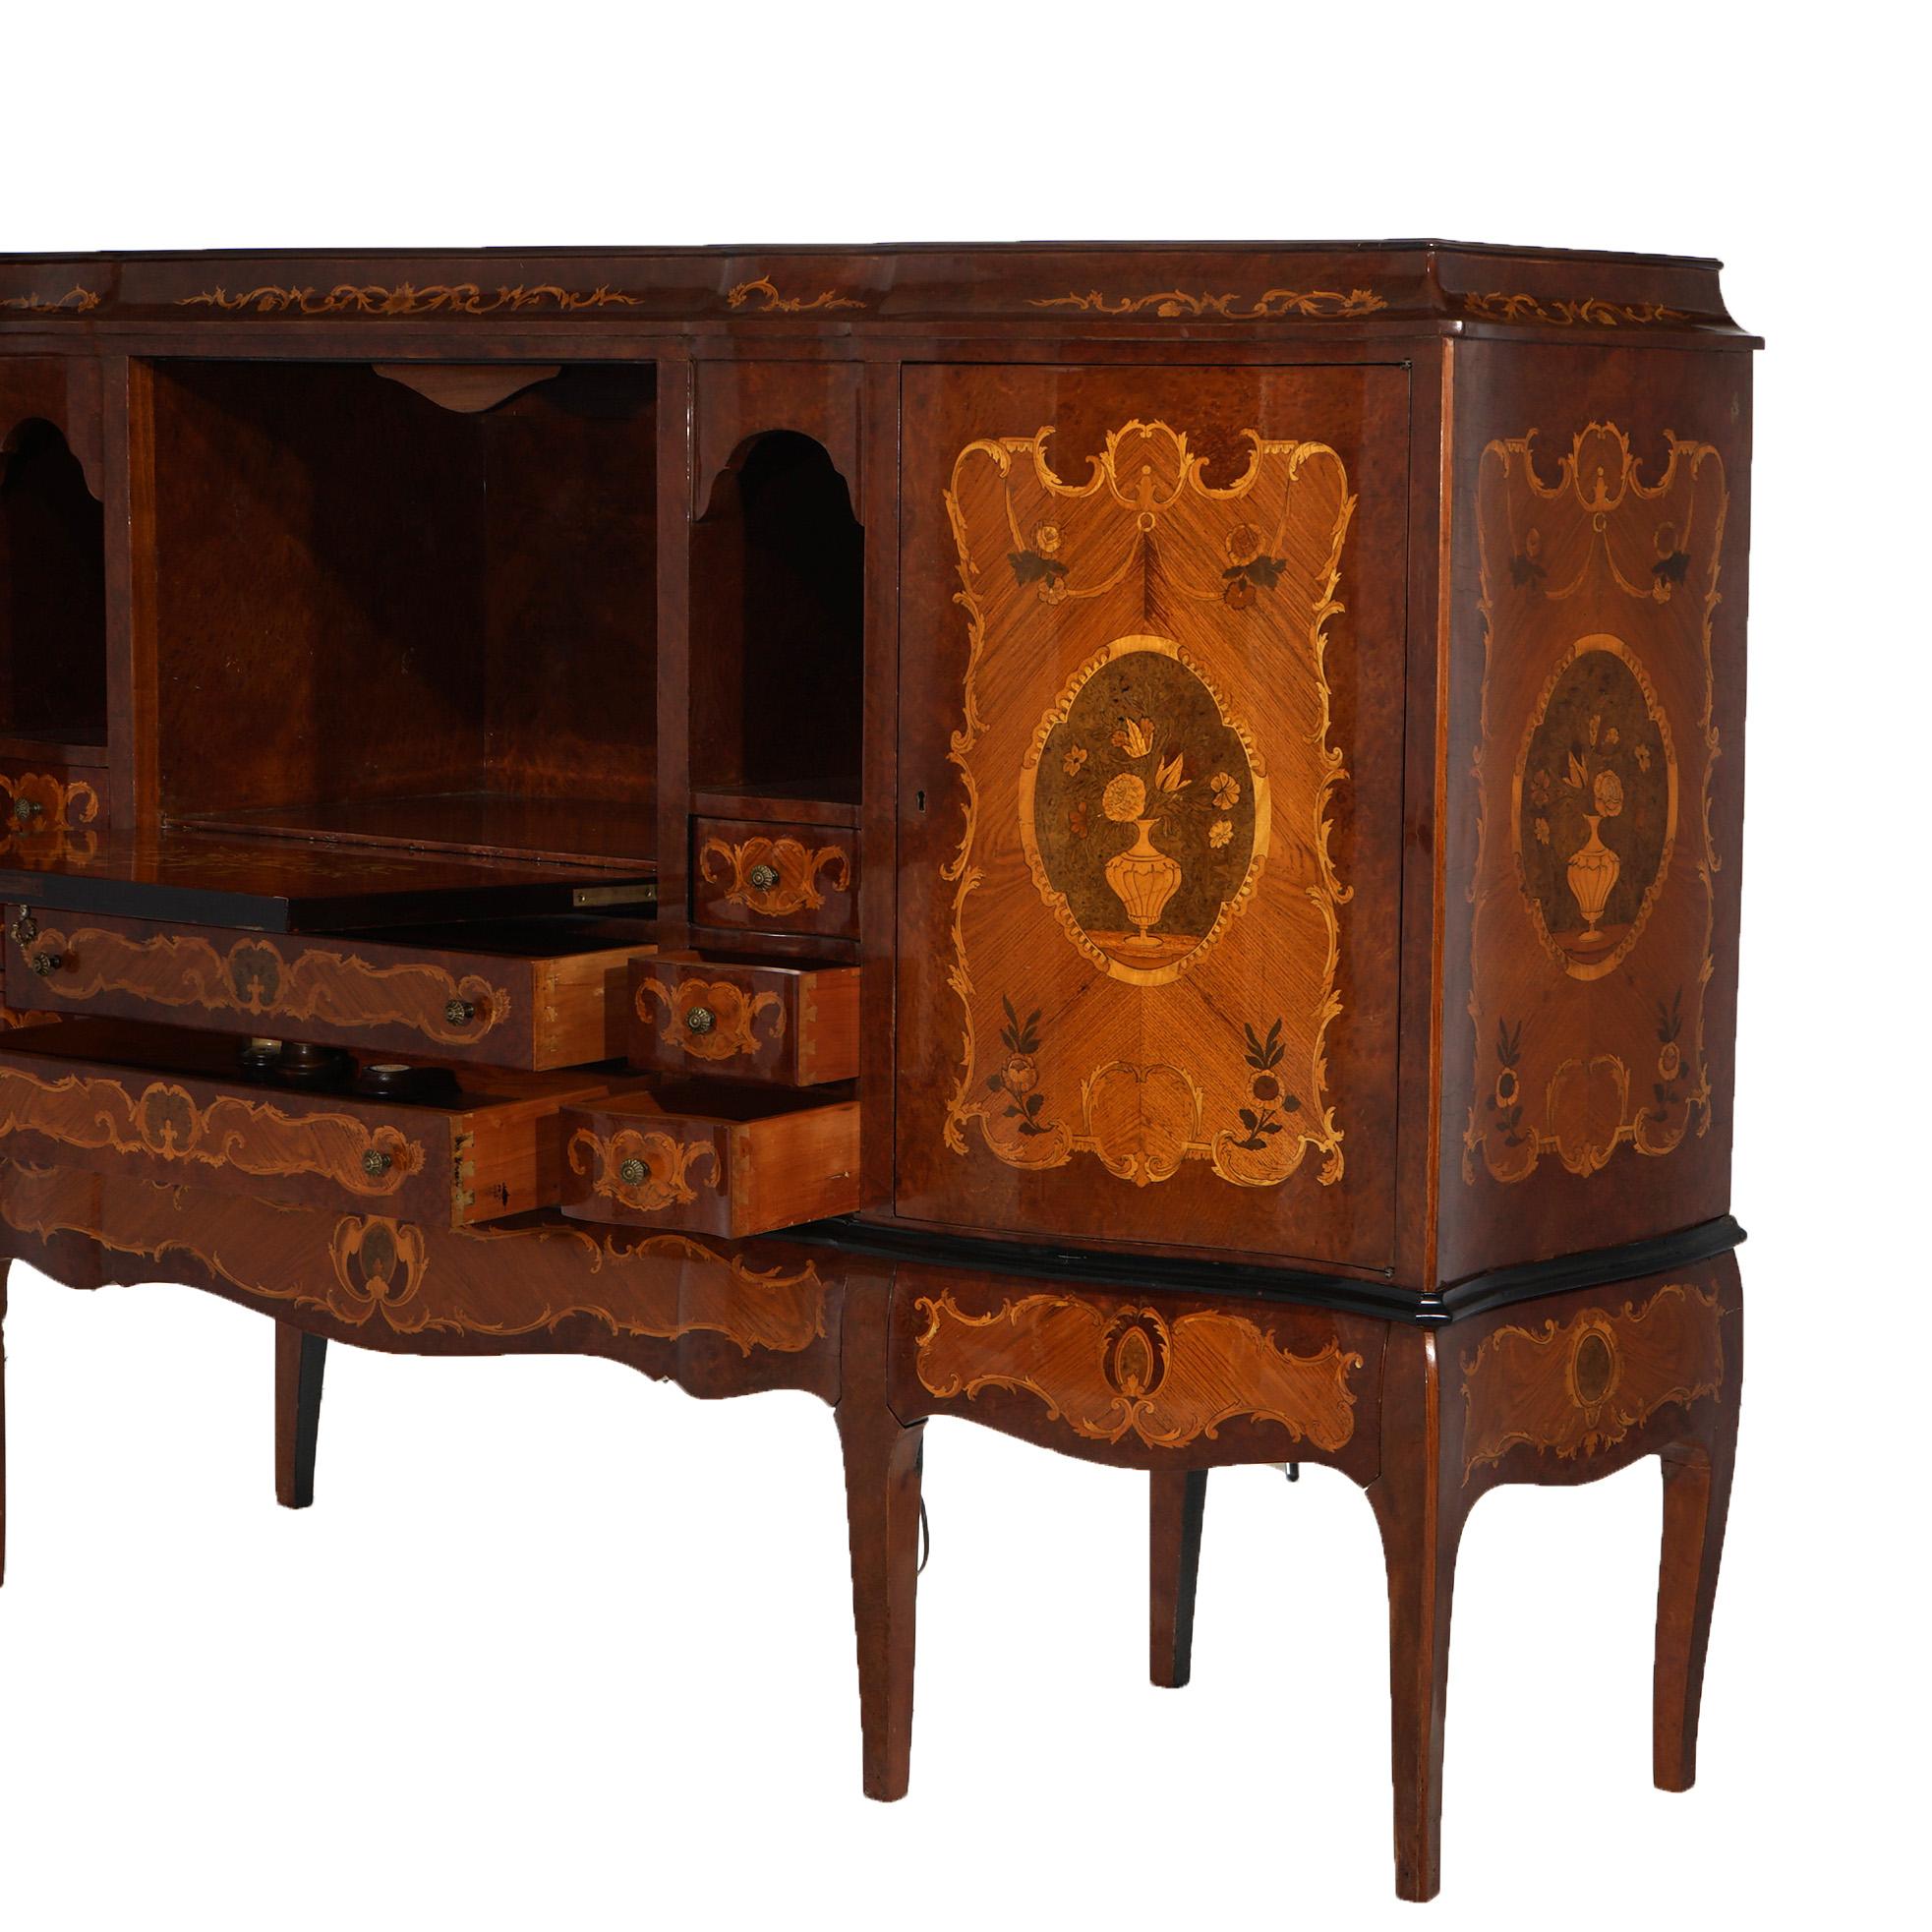 Antique French Kingwood Satinwood & Burlwood Marquetry Inlaid Sideboard C1930 For Sale 4